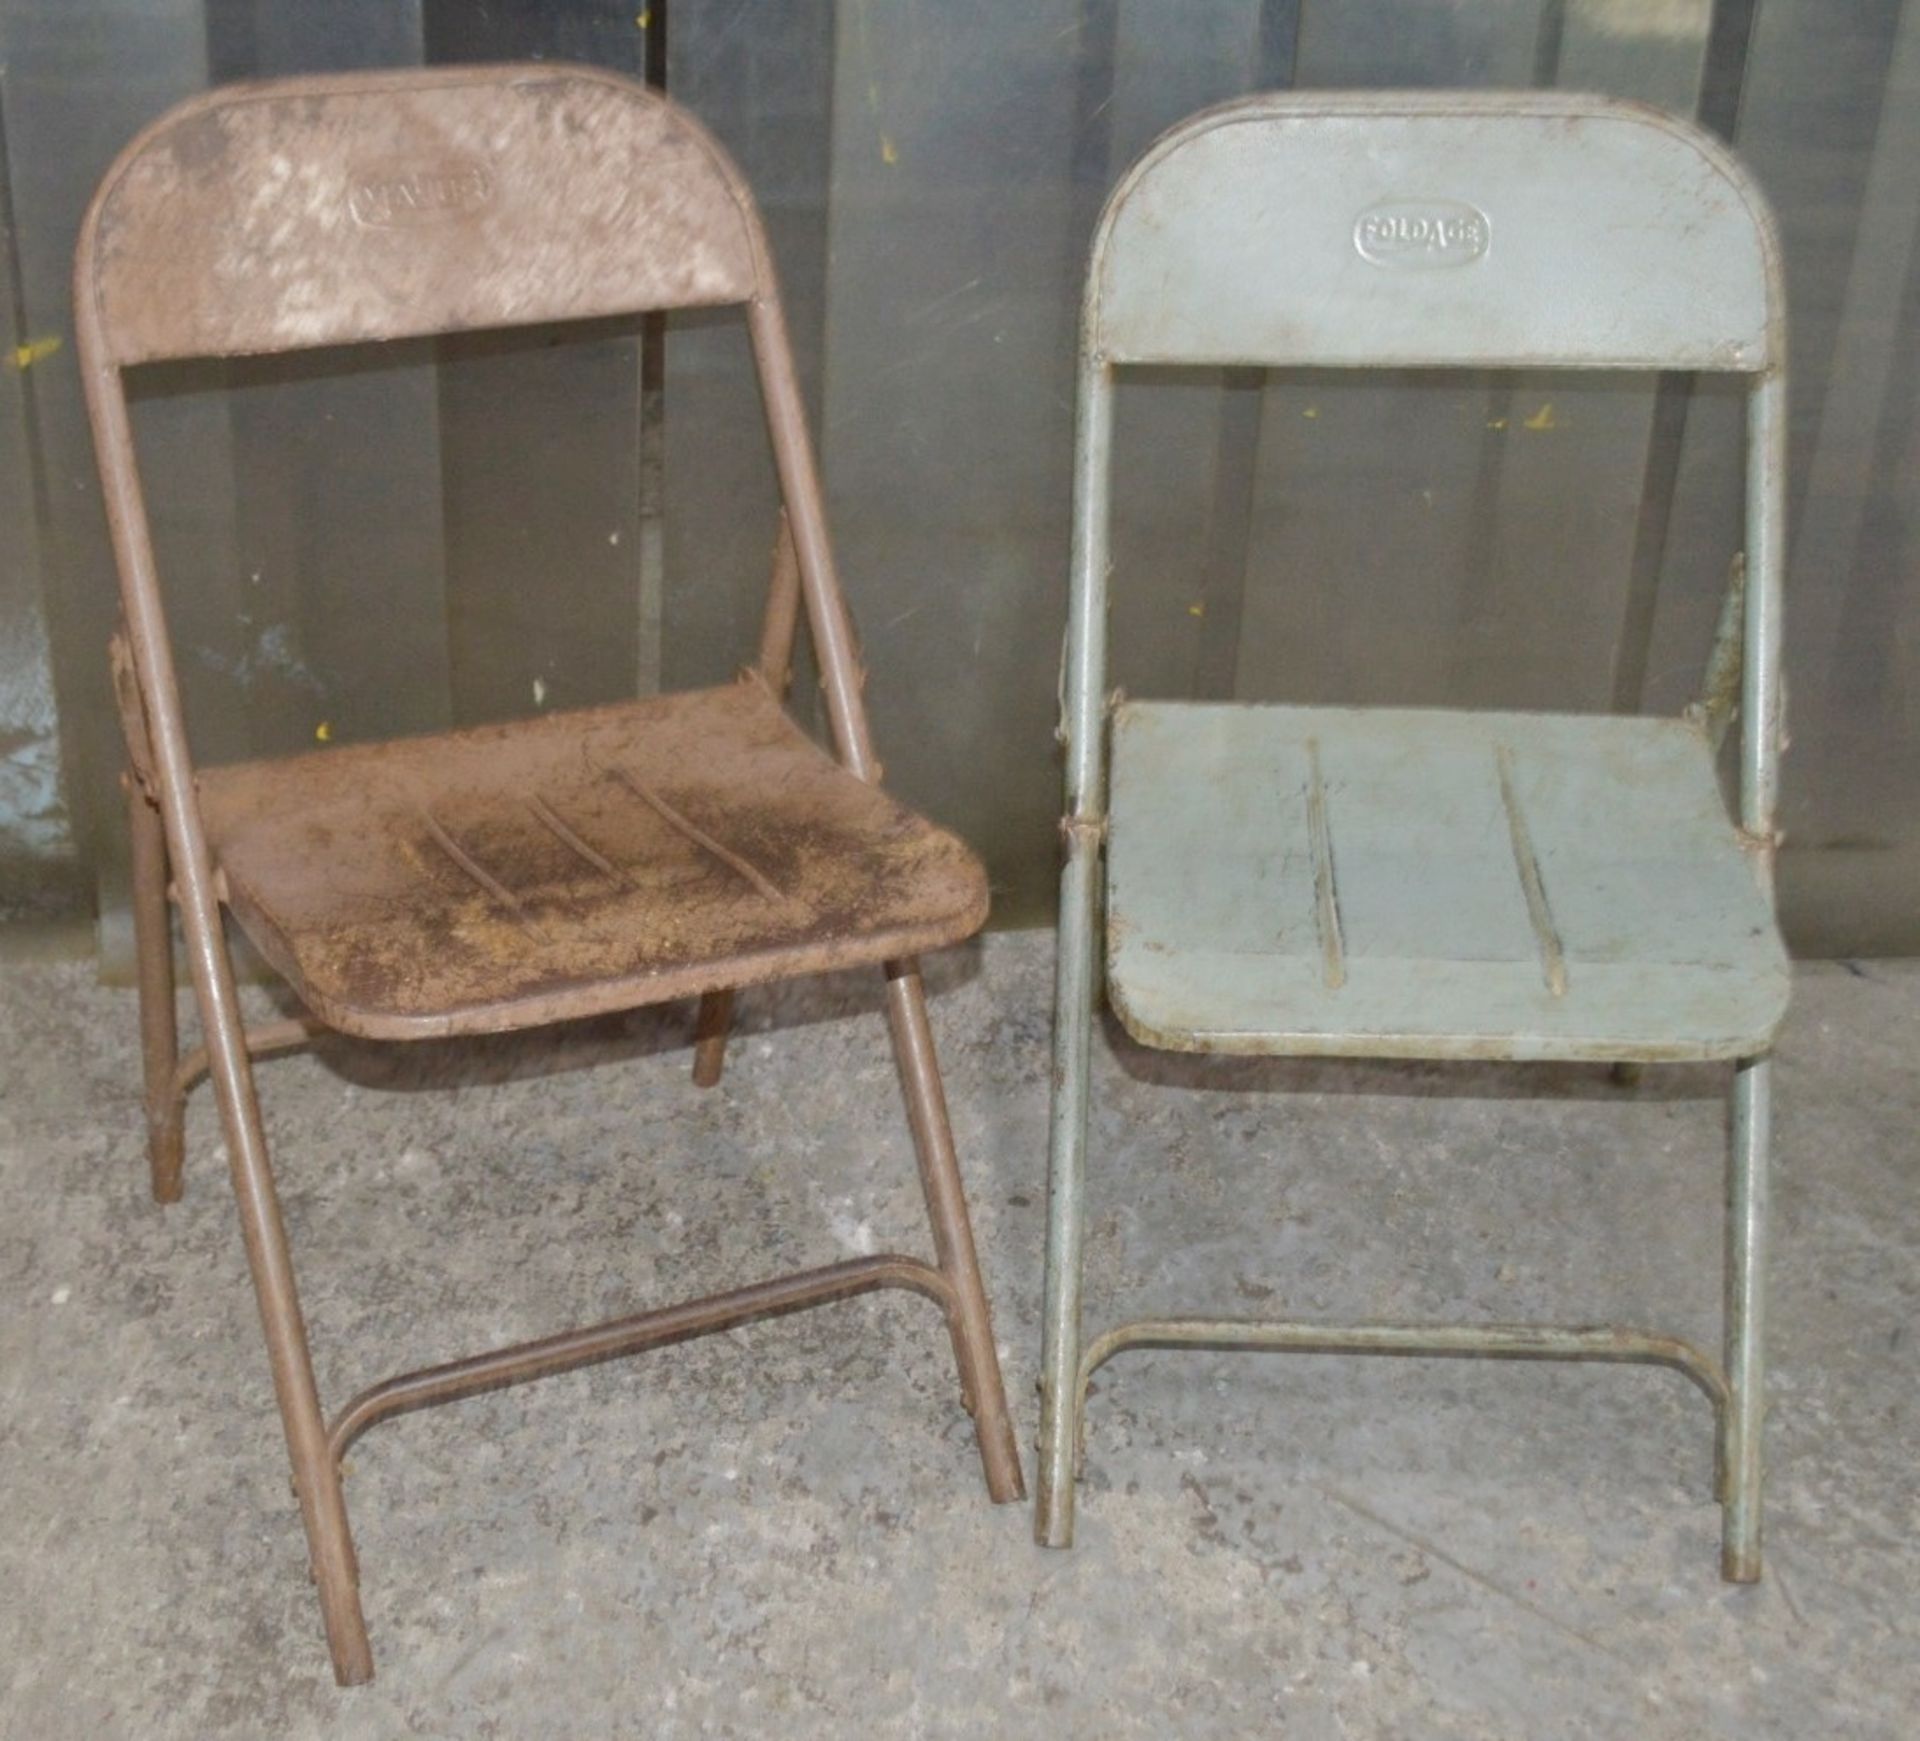 5 x Assorted Rustic Folding Metal Chairs - Dimensions (approx): H78 x W44 x D49cm, Seat 42cm - Image 6 of 6